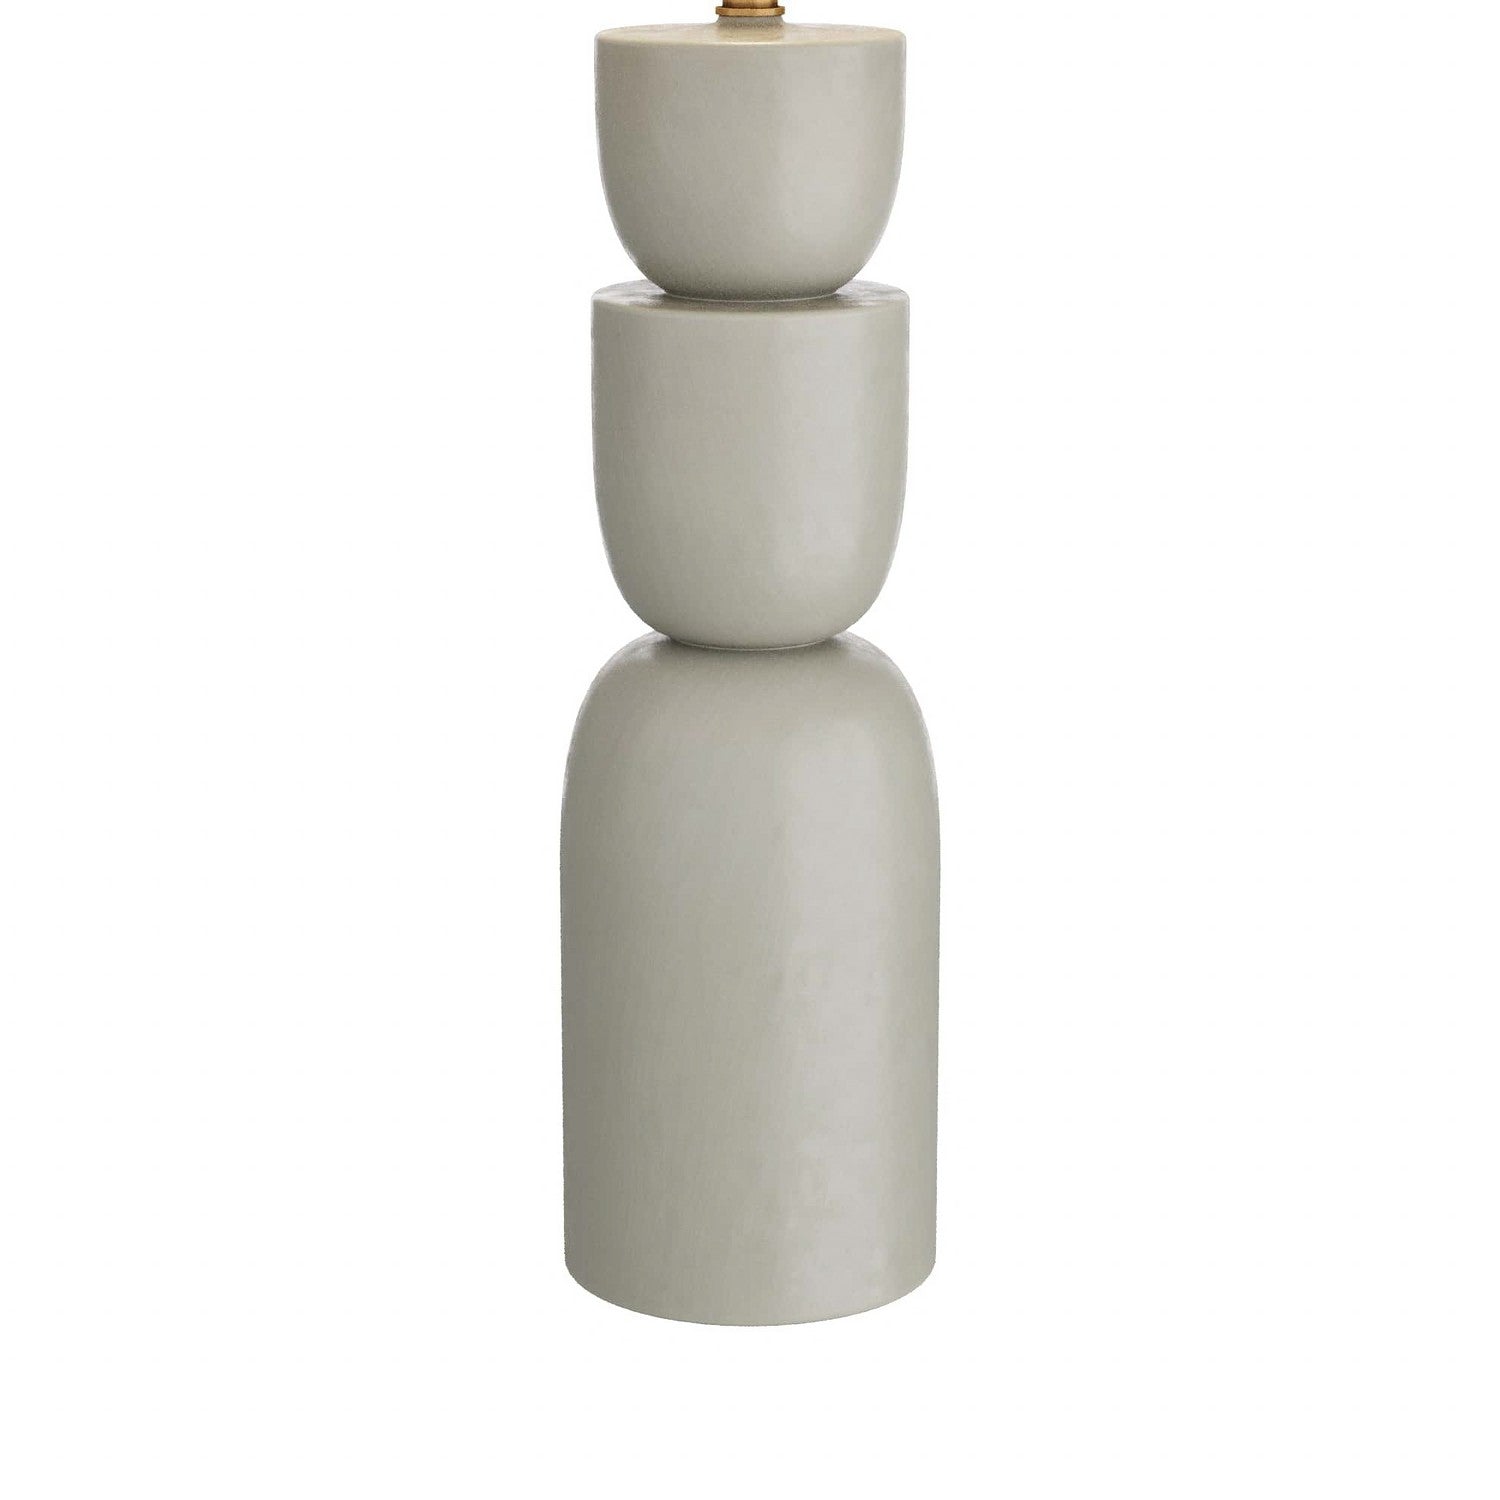 One Light Table Lamp from the Tasha collection in Trout finish